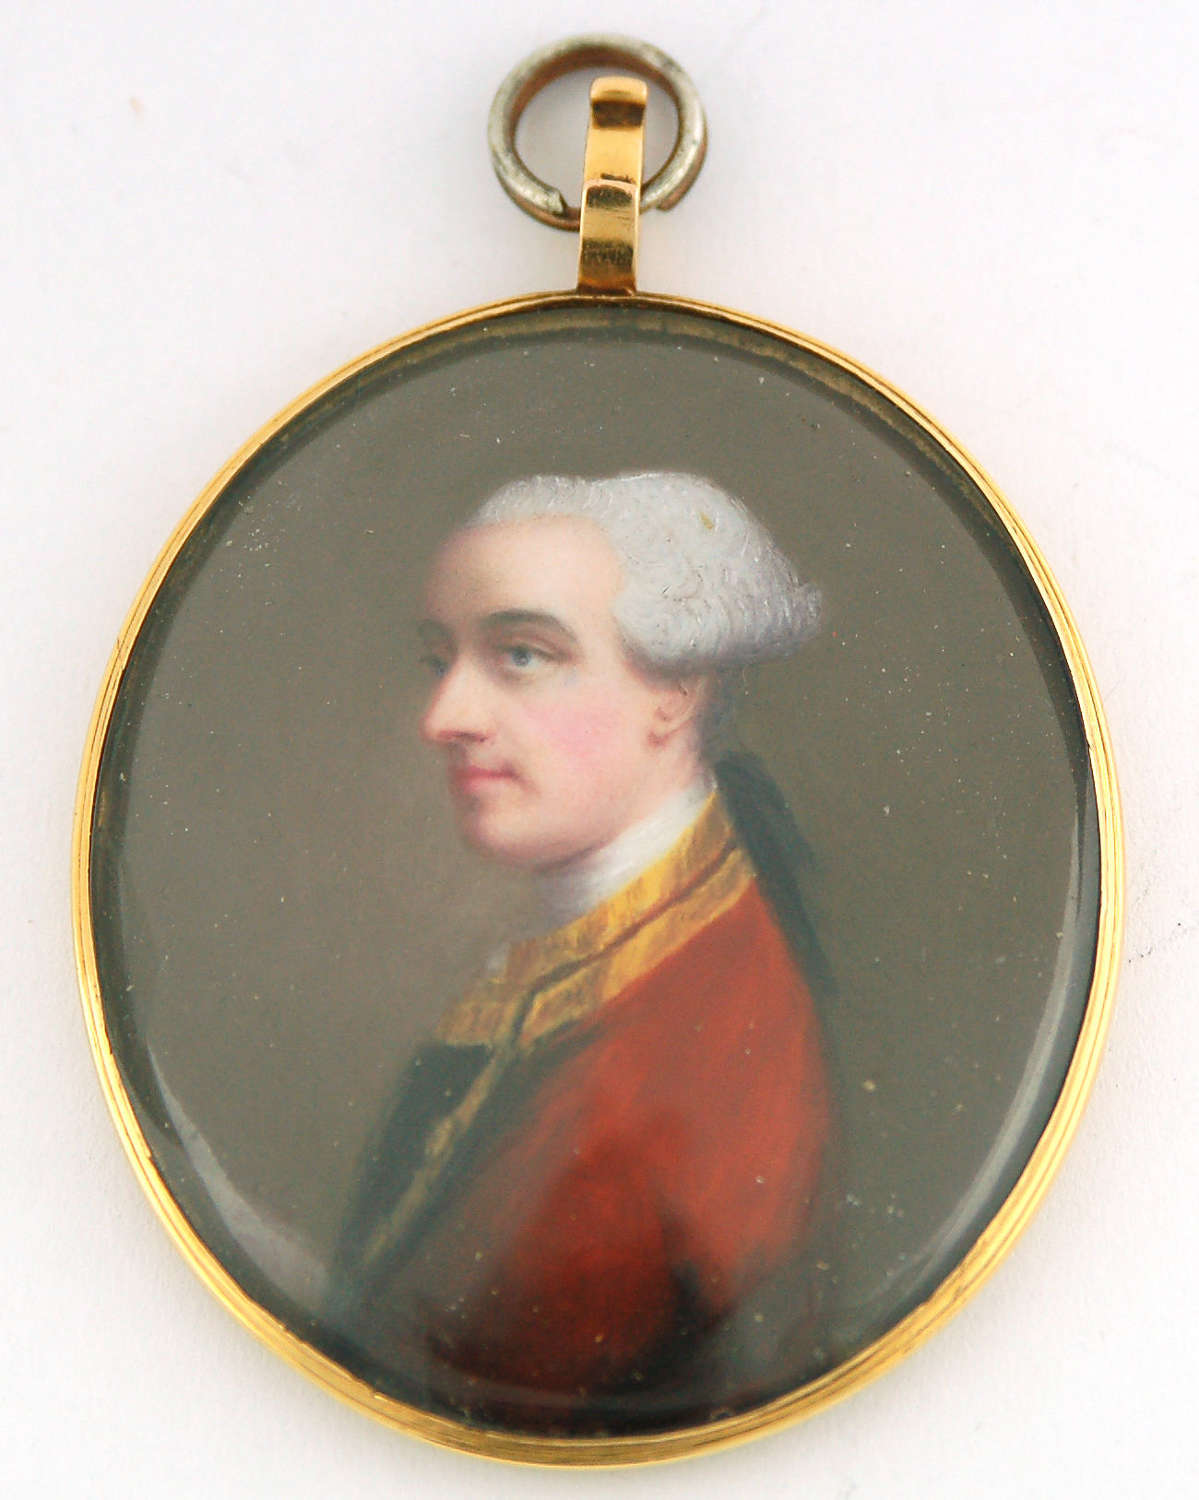 Miniature of gent from Clerk of Penicuik family by G Spencer